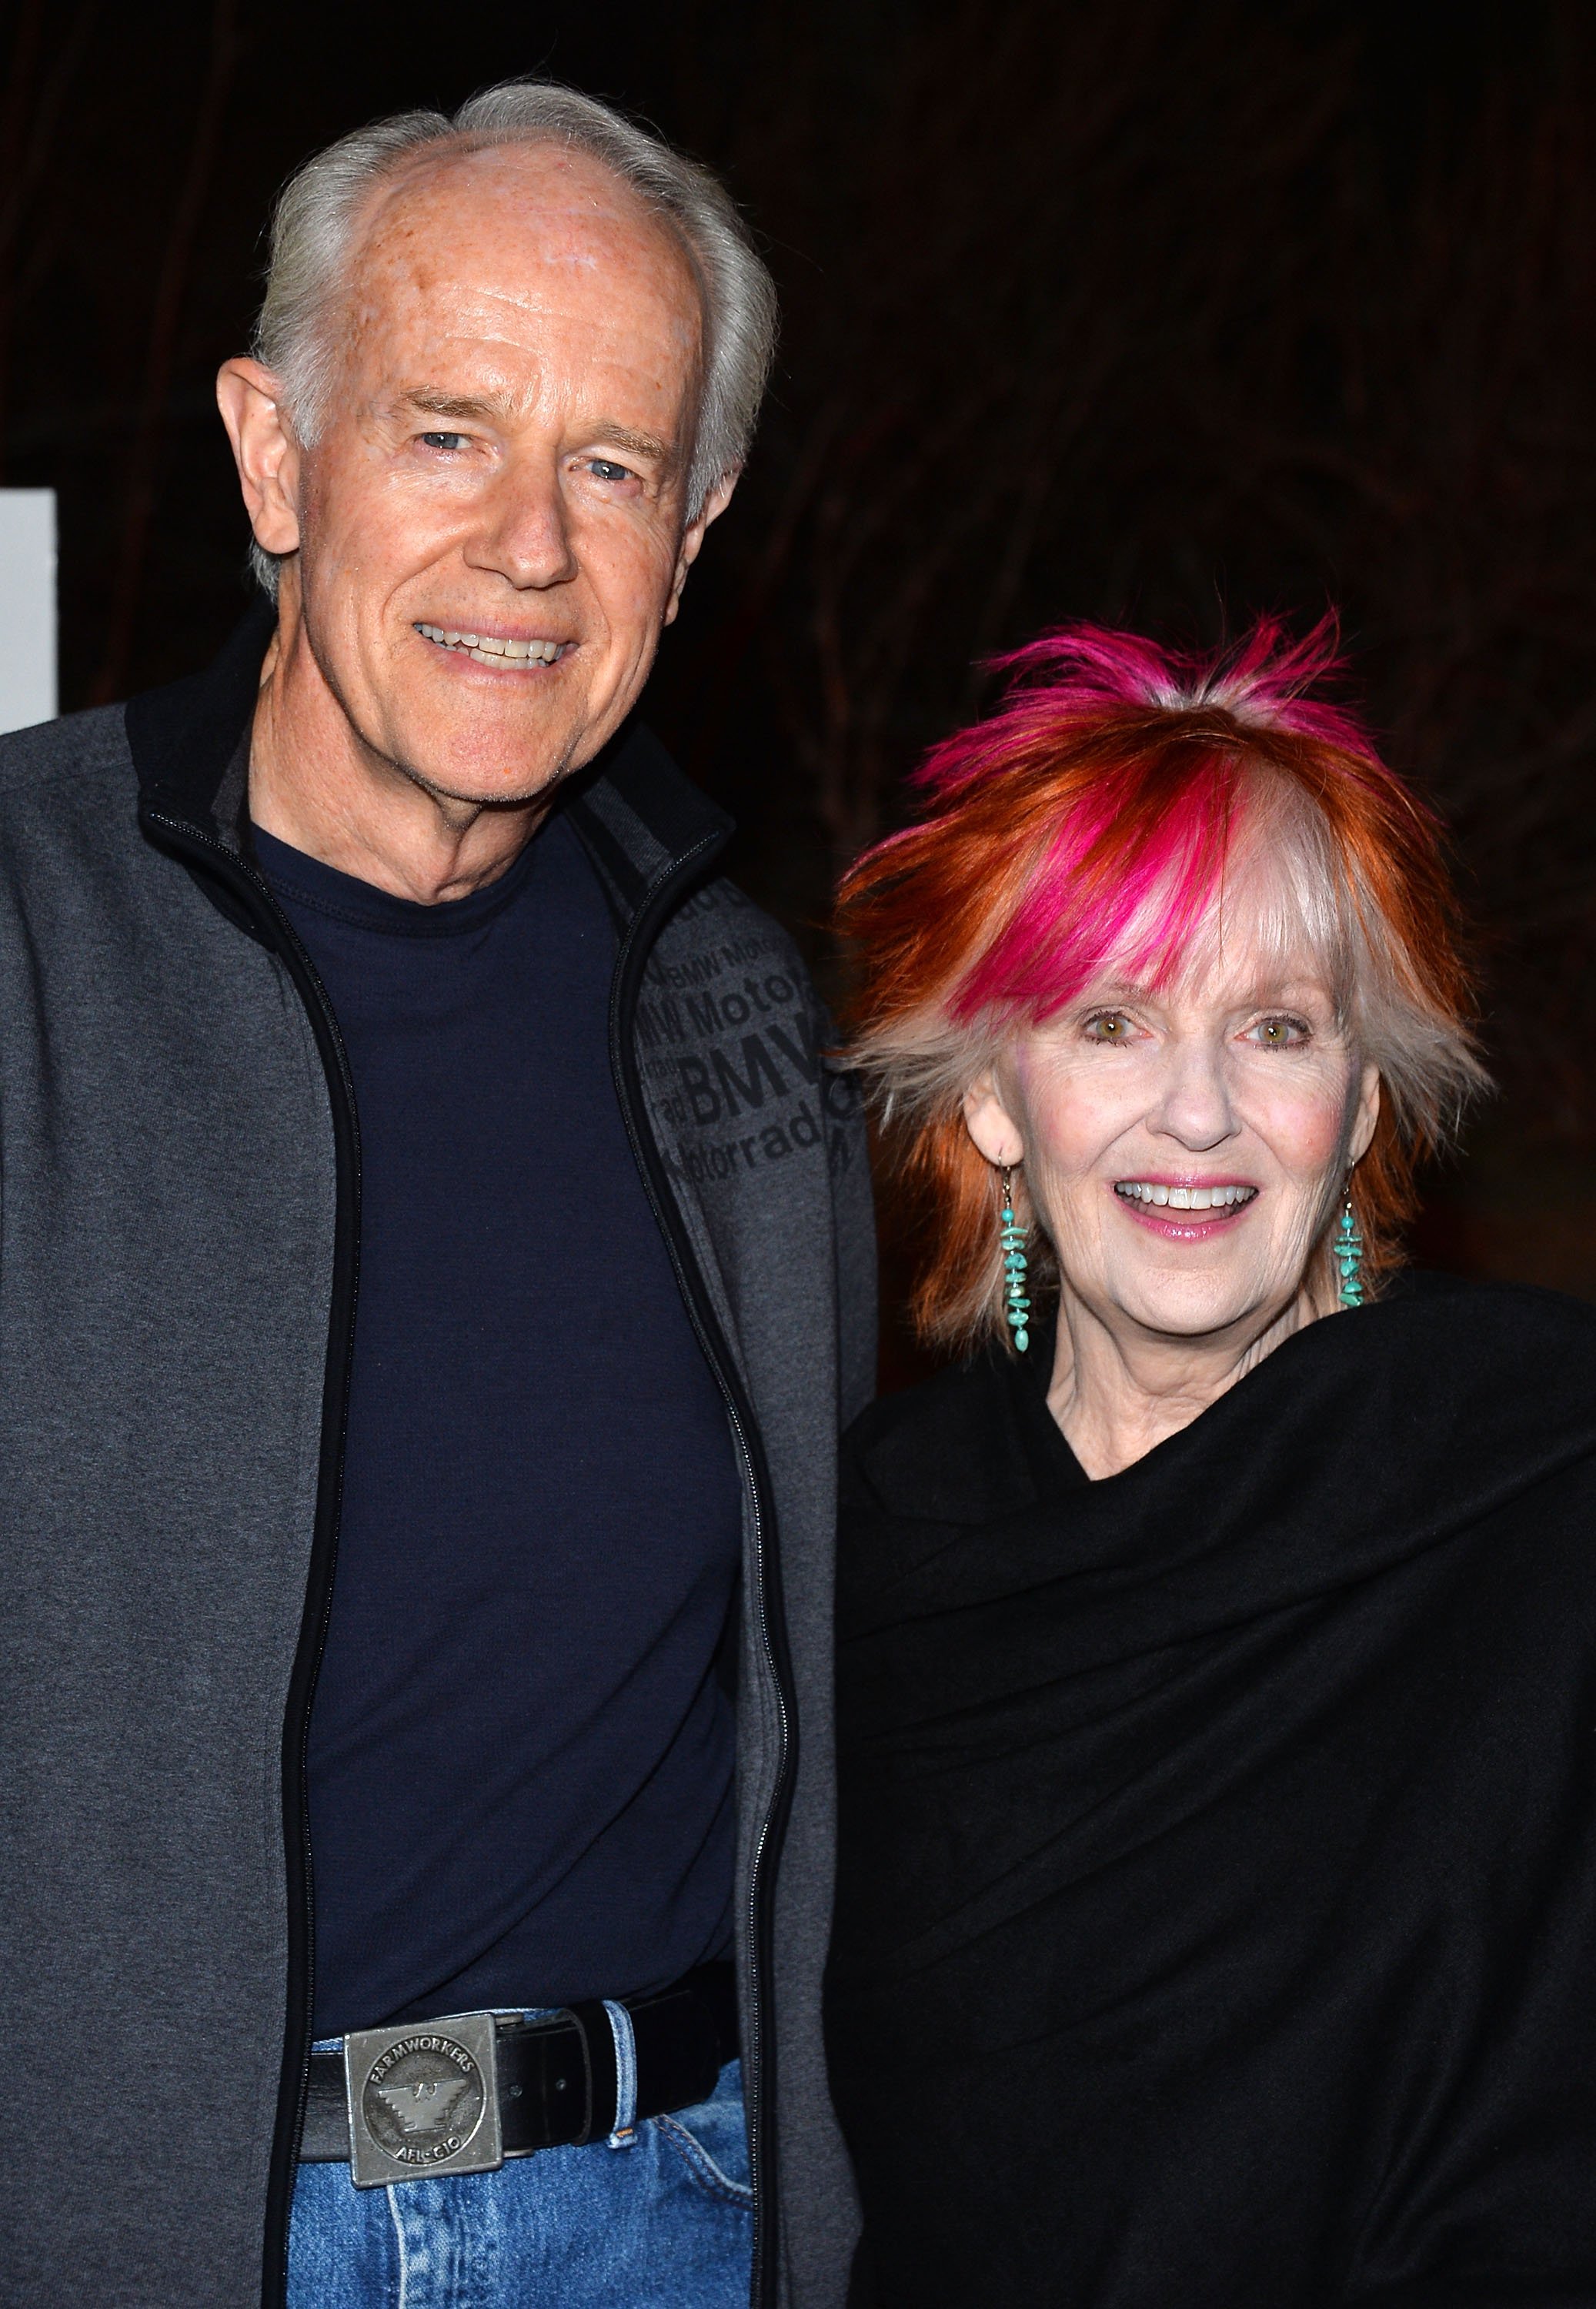 Mike Farrell and Shelley Fabare at the Sundance Channel's premiere screening of the series "The Red Road" on February 24, 2014, in Los Angeles. | Source: Getty Images